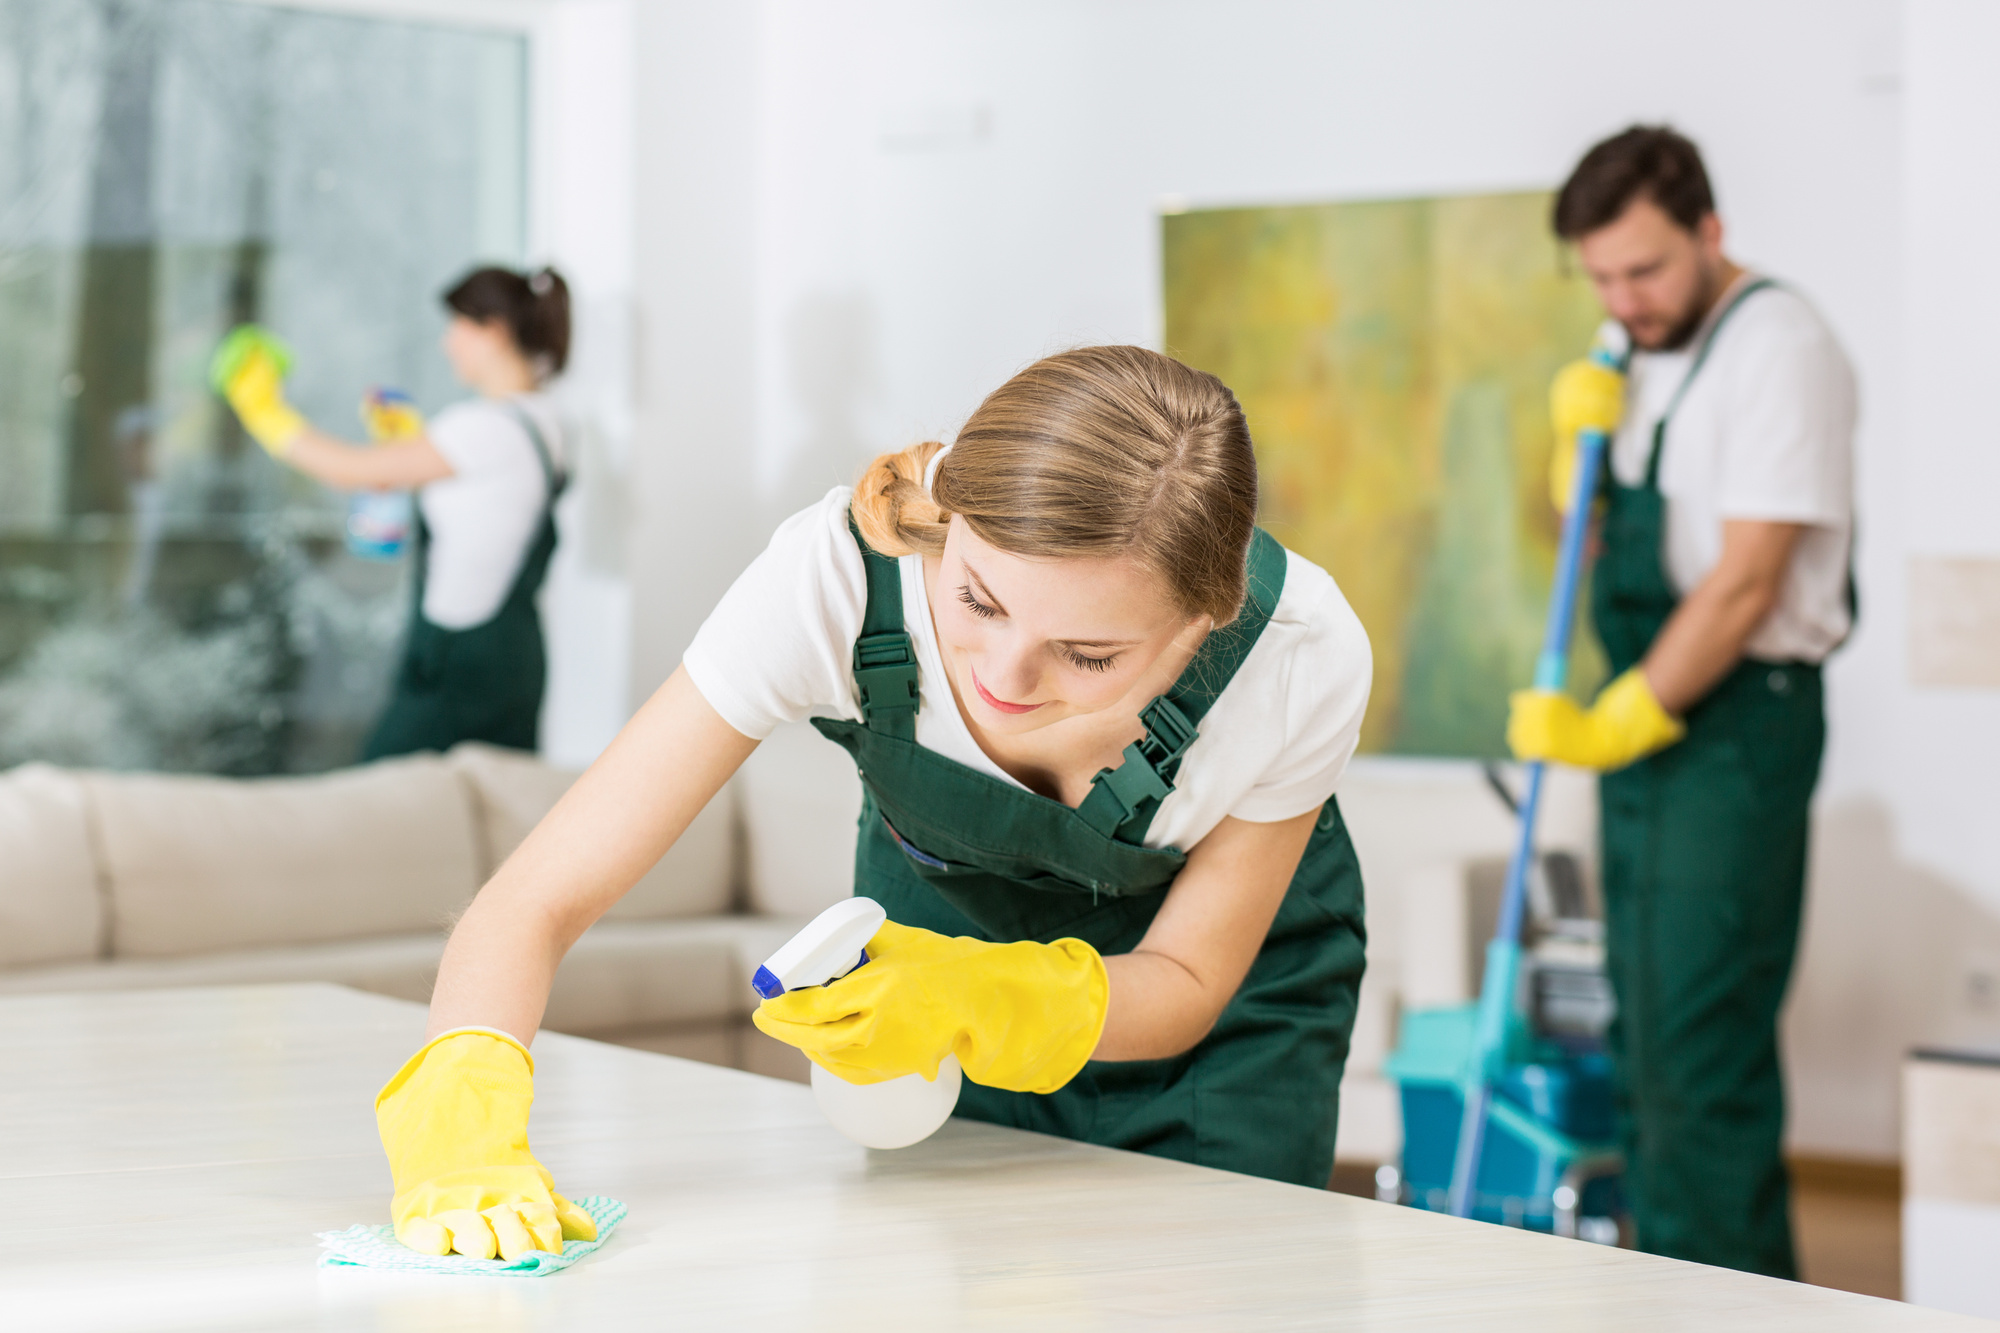 Sometimes, there is just not enough time in the week to properly clean your home. This is where professional cleaning services come in.